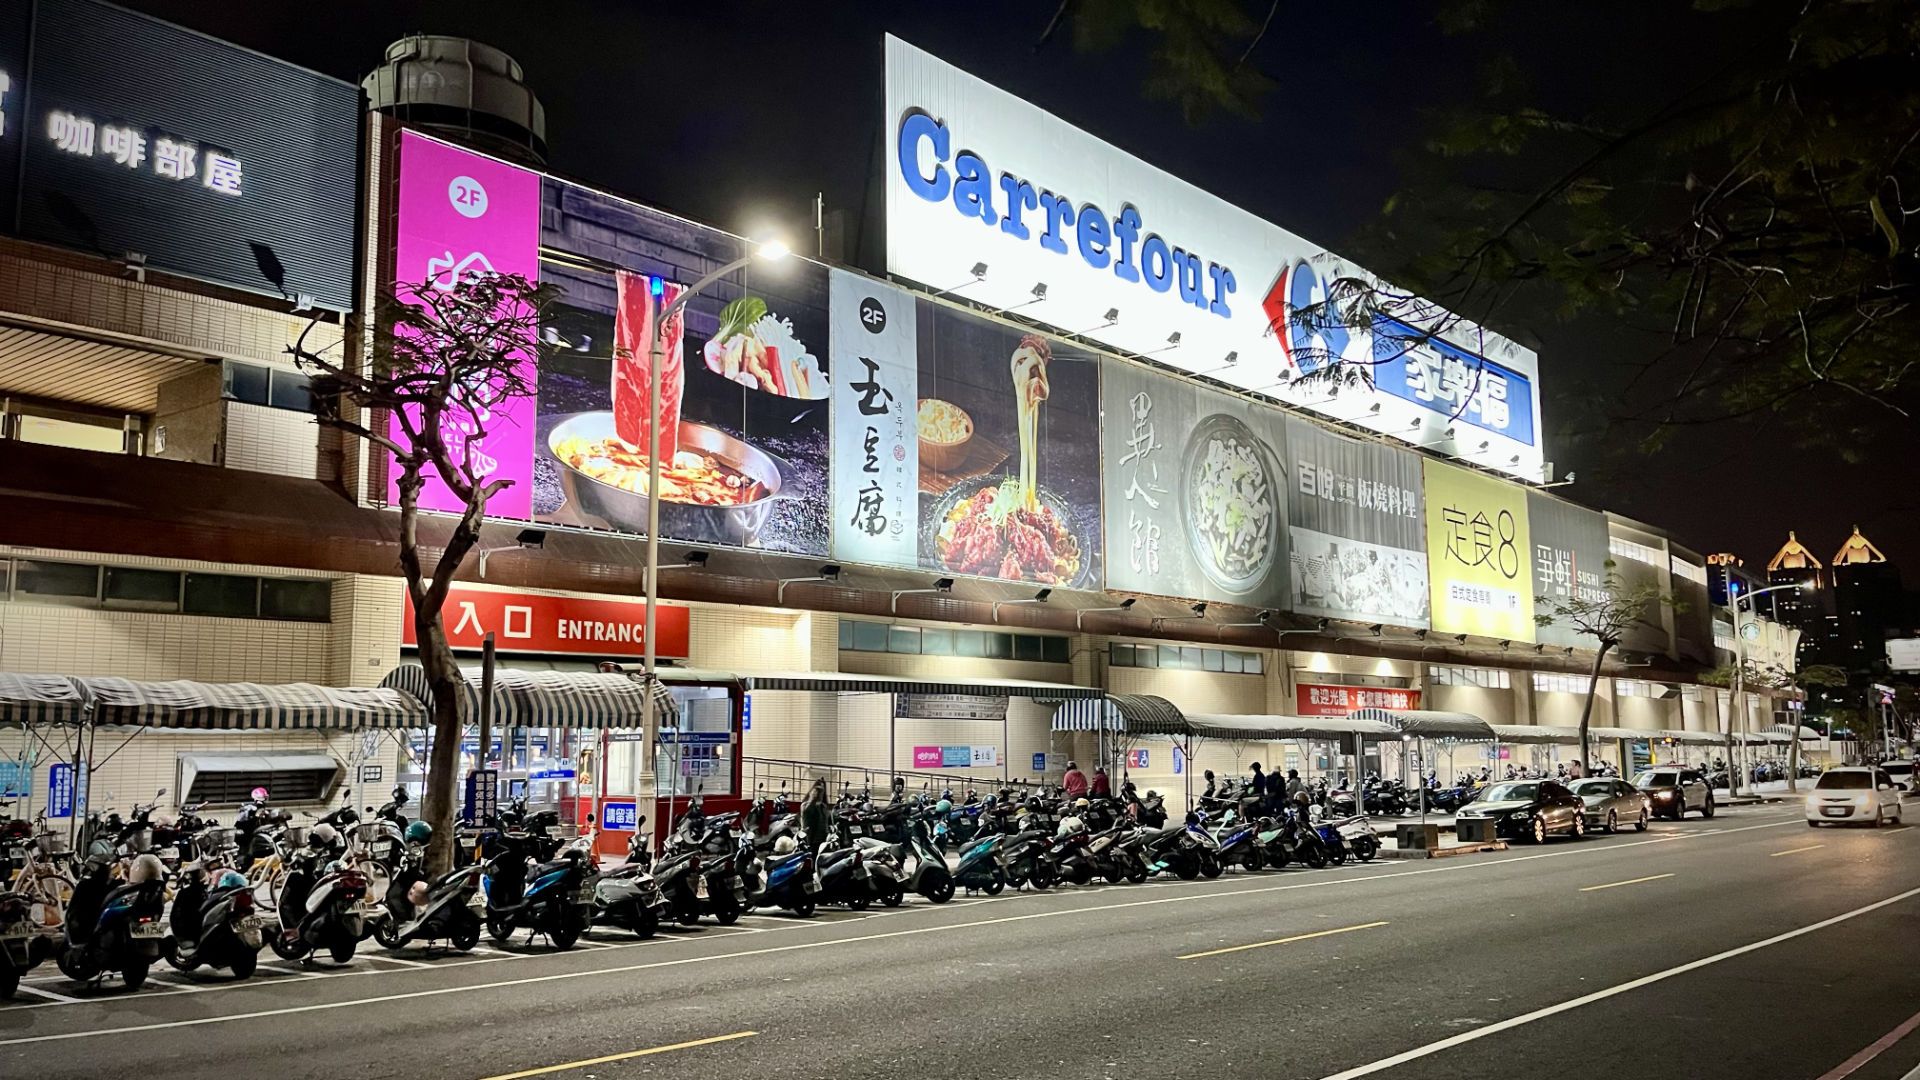 The outside of the Carrefour at Love River. Dozens of scooters are parked outside.